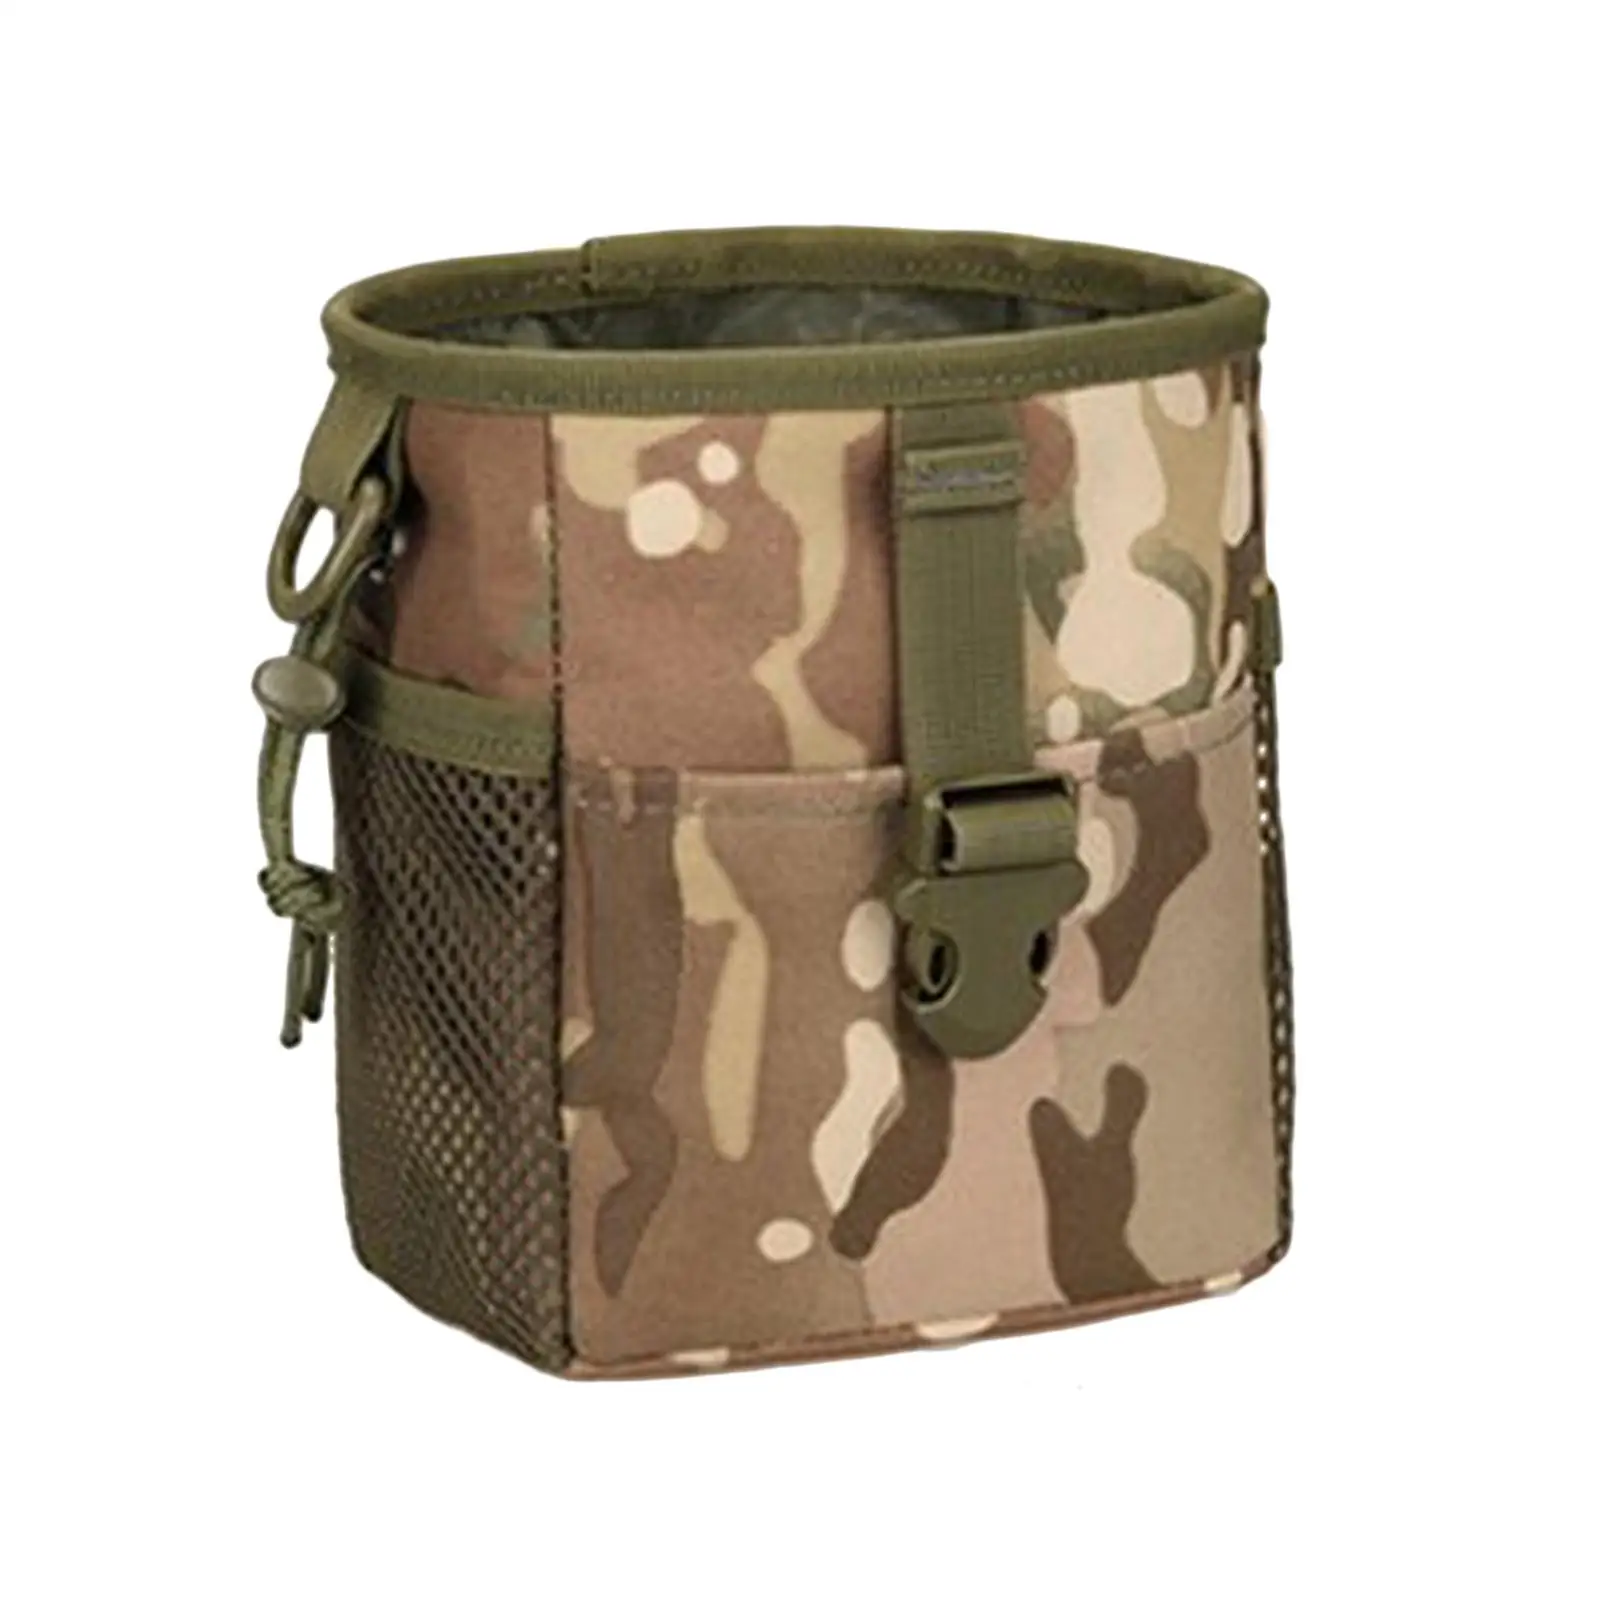 Pouch Bag Multifunction Attachments Accessories Durable Belt Bag for Gear Hiking